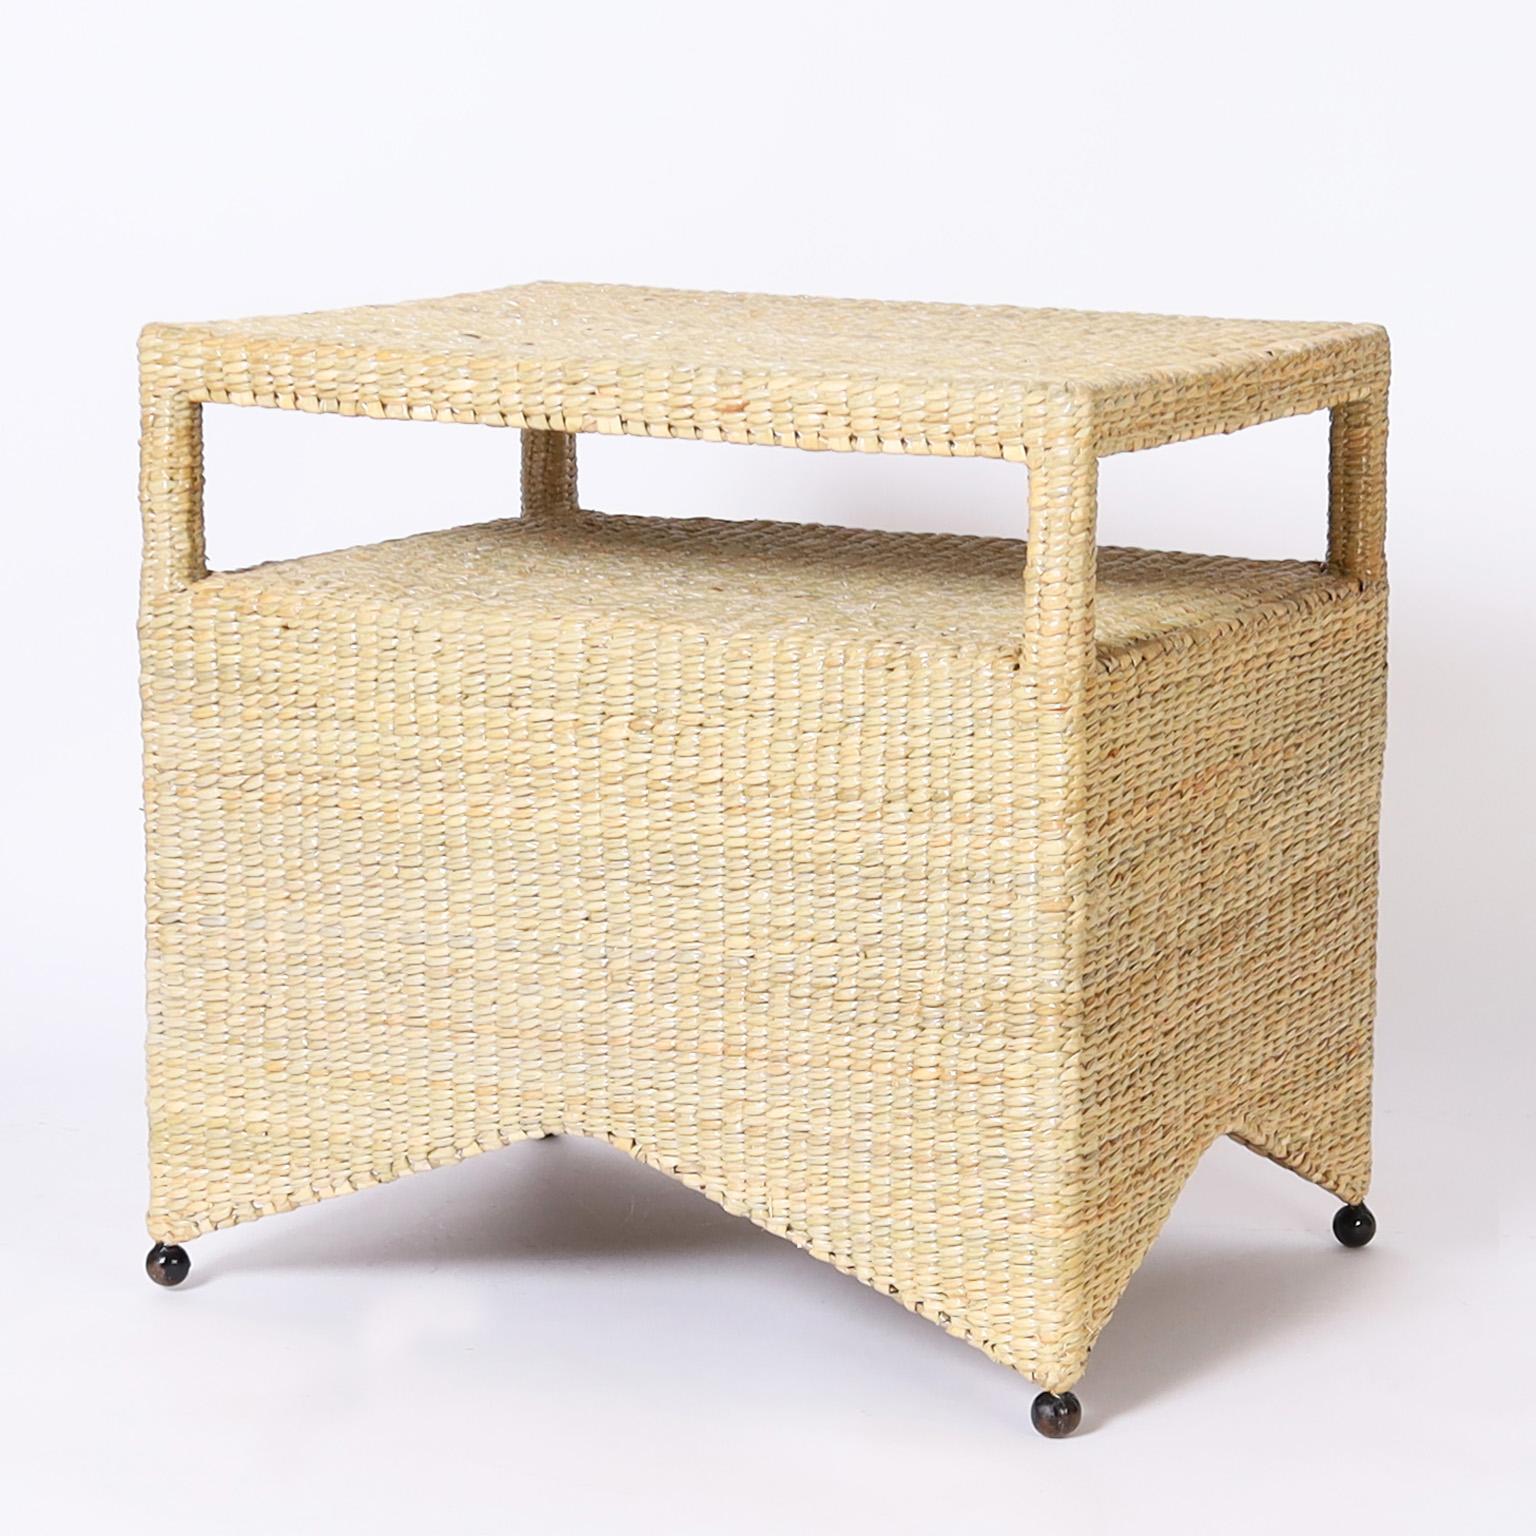 Organic Modern Pair of Two Tiered Wicker Stands from the FS Flores Collection